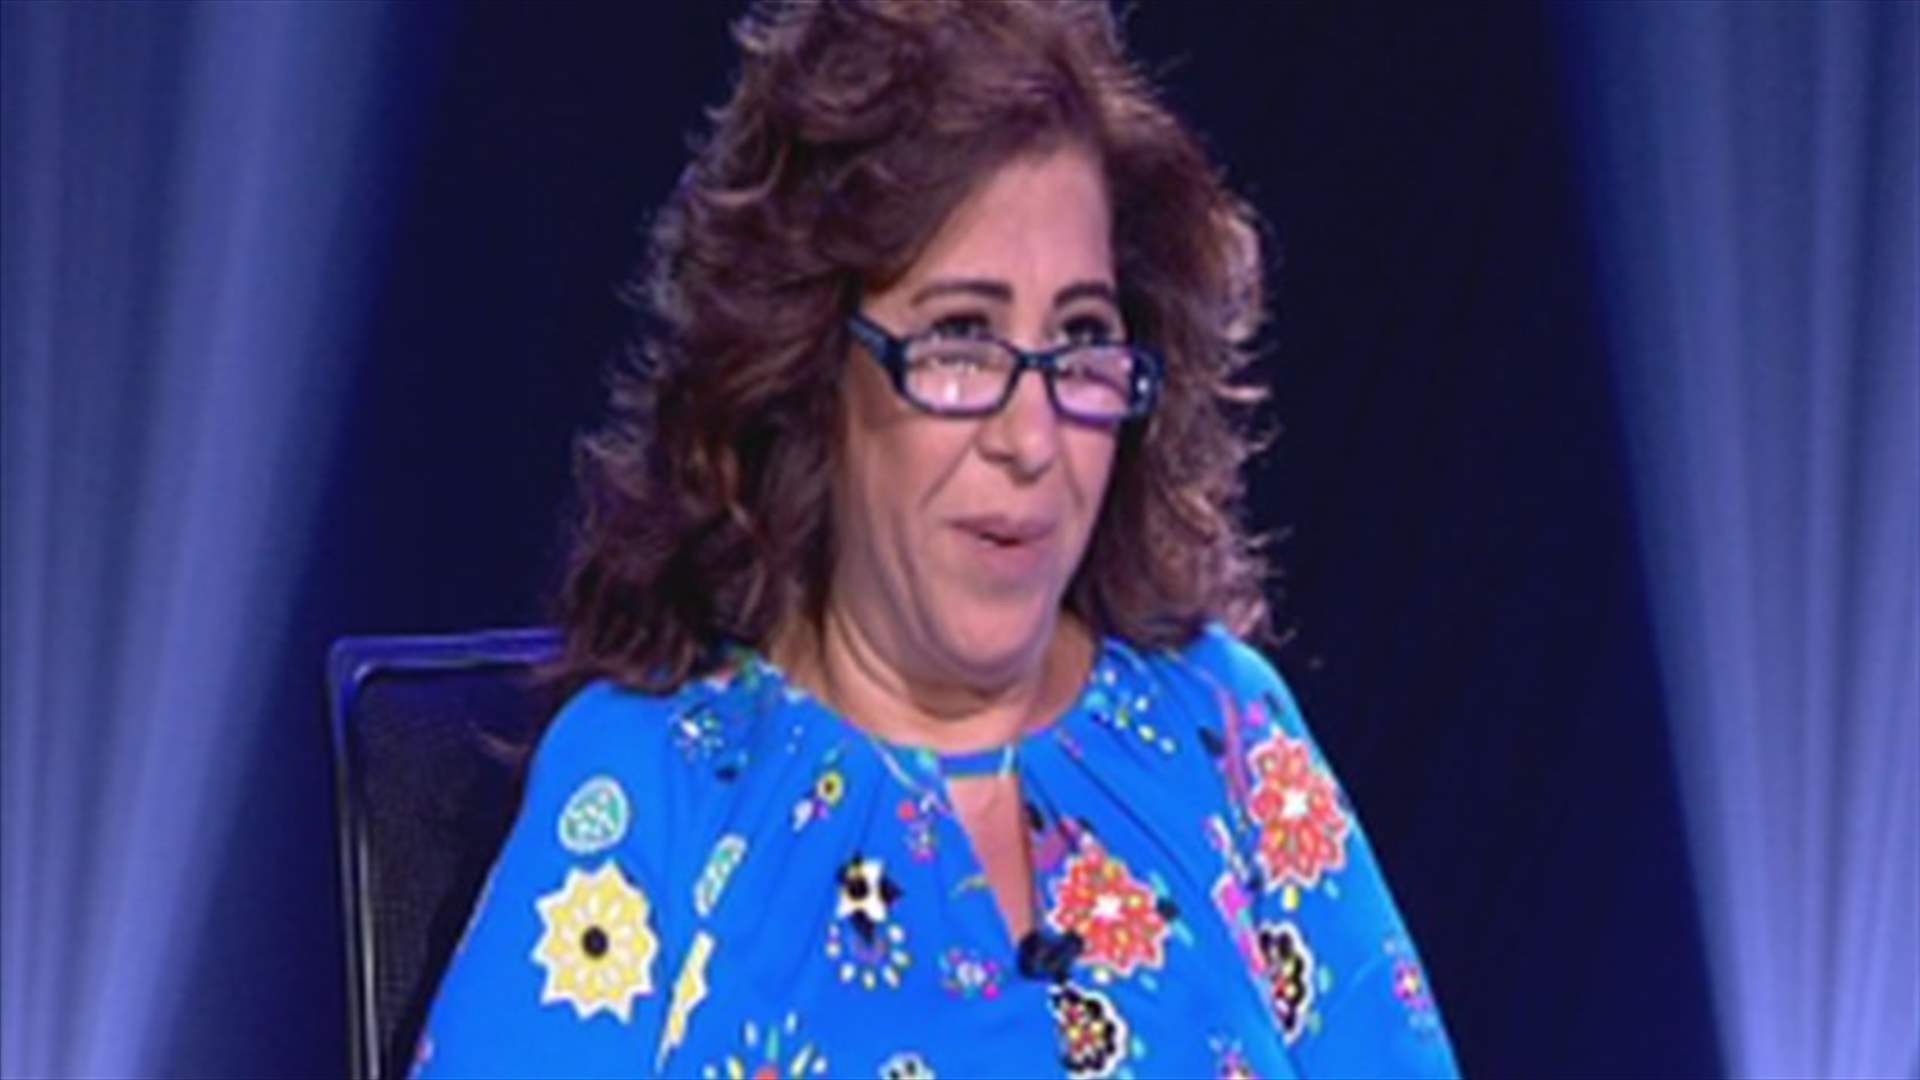 Leila Abdel Latif launches a series of predictions for Lebanon and the region